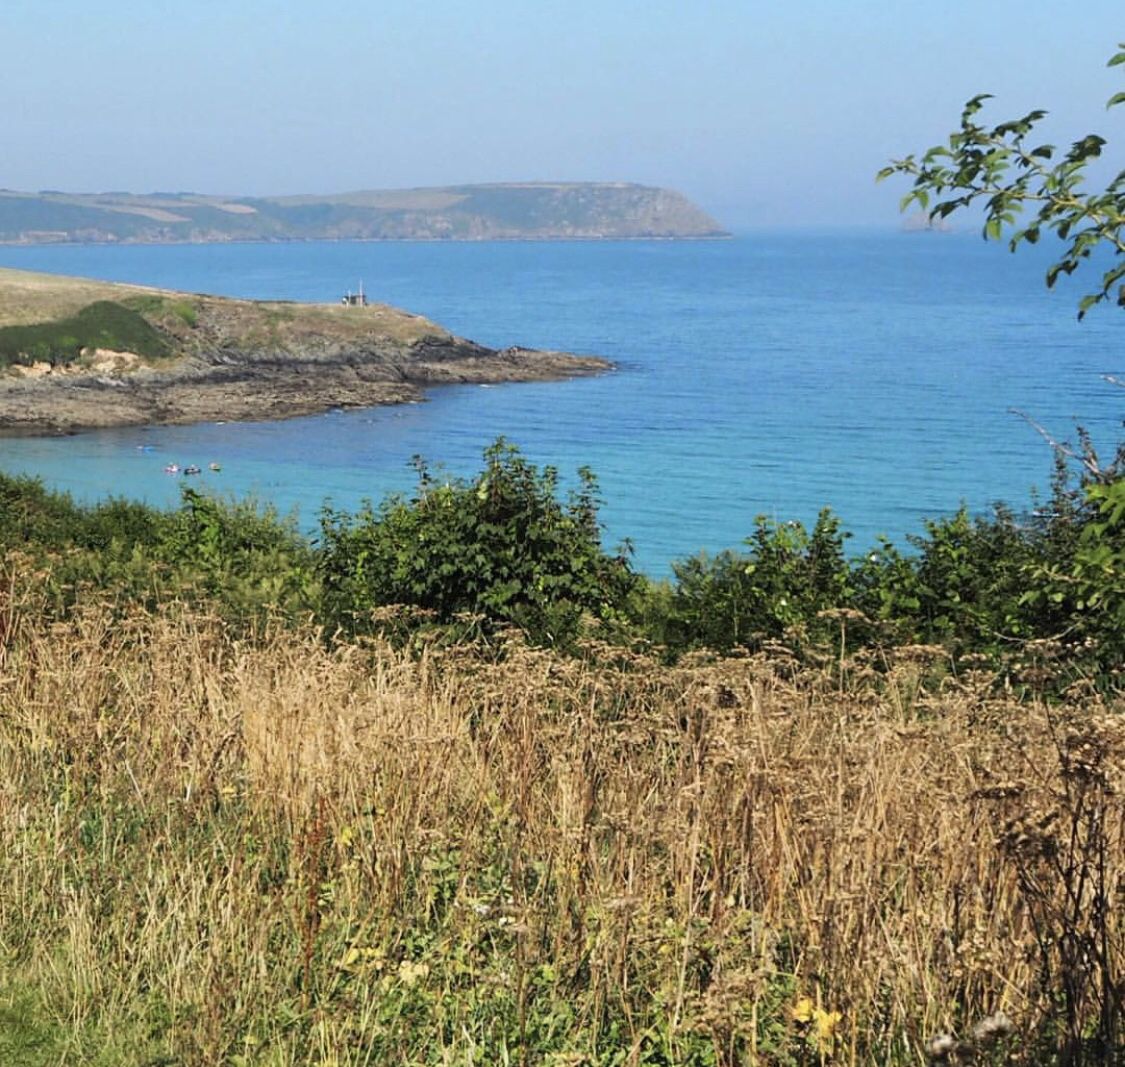 Saturday morning and it’s time to get up and take the pooch out for a walk! But where is your favourite weekend walk? We love stomping round the Roseland Peninsular especially when it’s clear and in the sunshine. 📸 by @Rei_arta_Cornwall #GetMeToCornwall #Portscatho #Cornwall